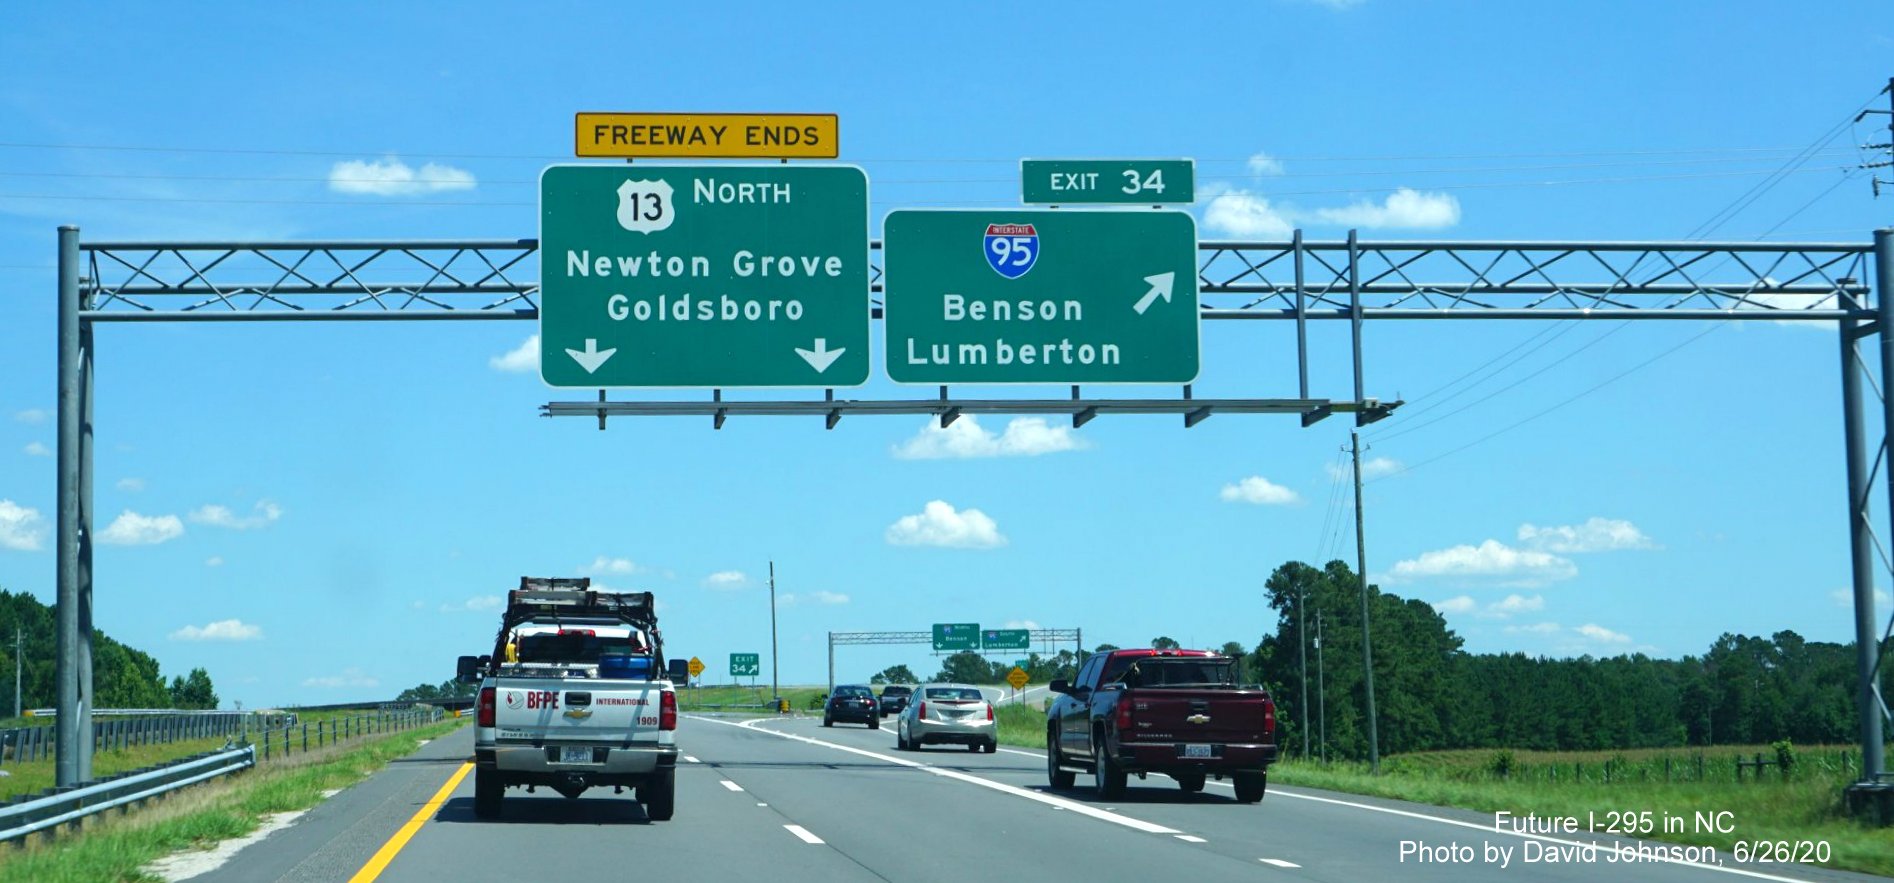 Image of overhead signage at I-95 exit ramp on I-295 North, by David Johnson June 2020